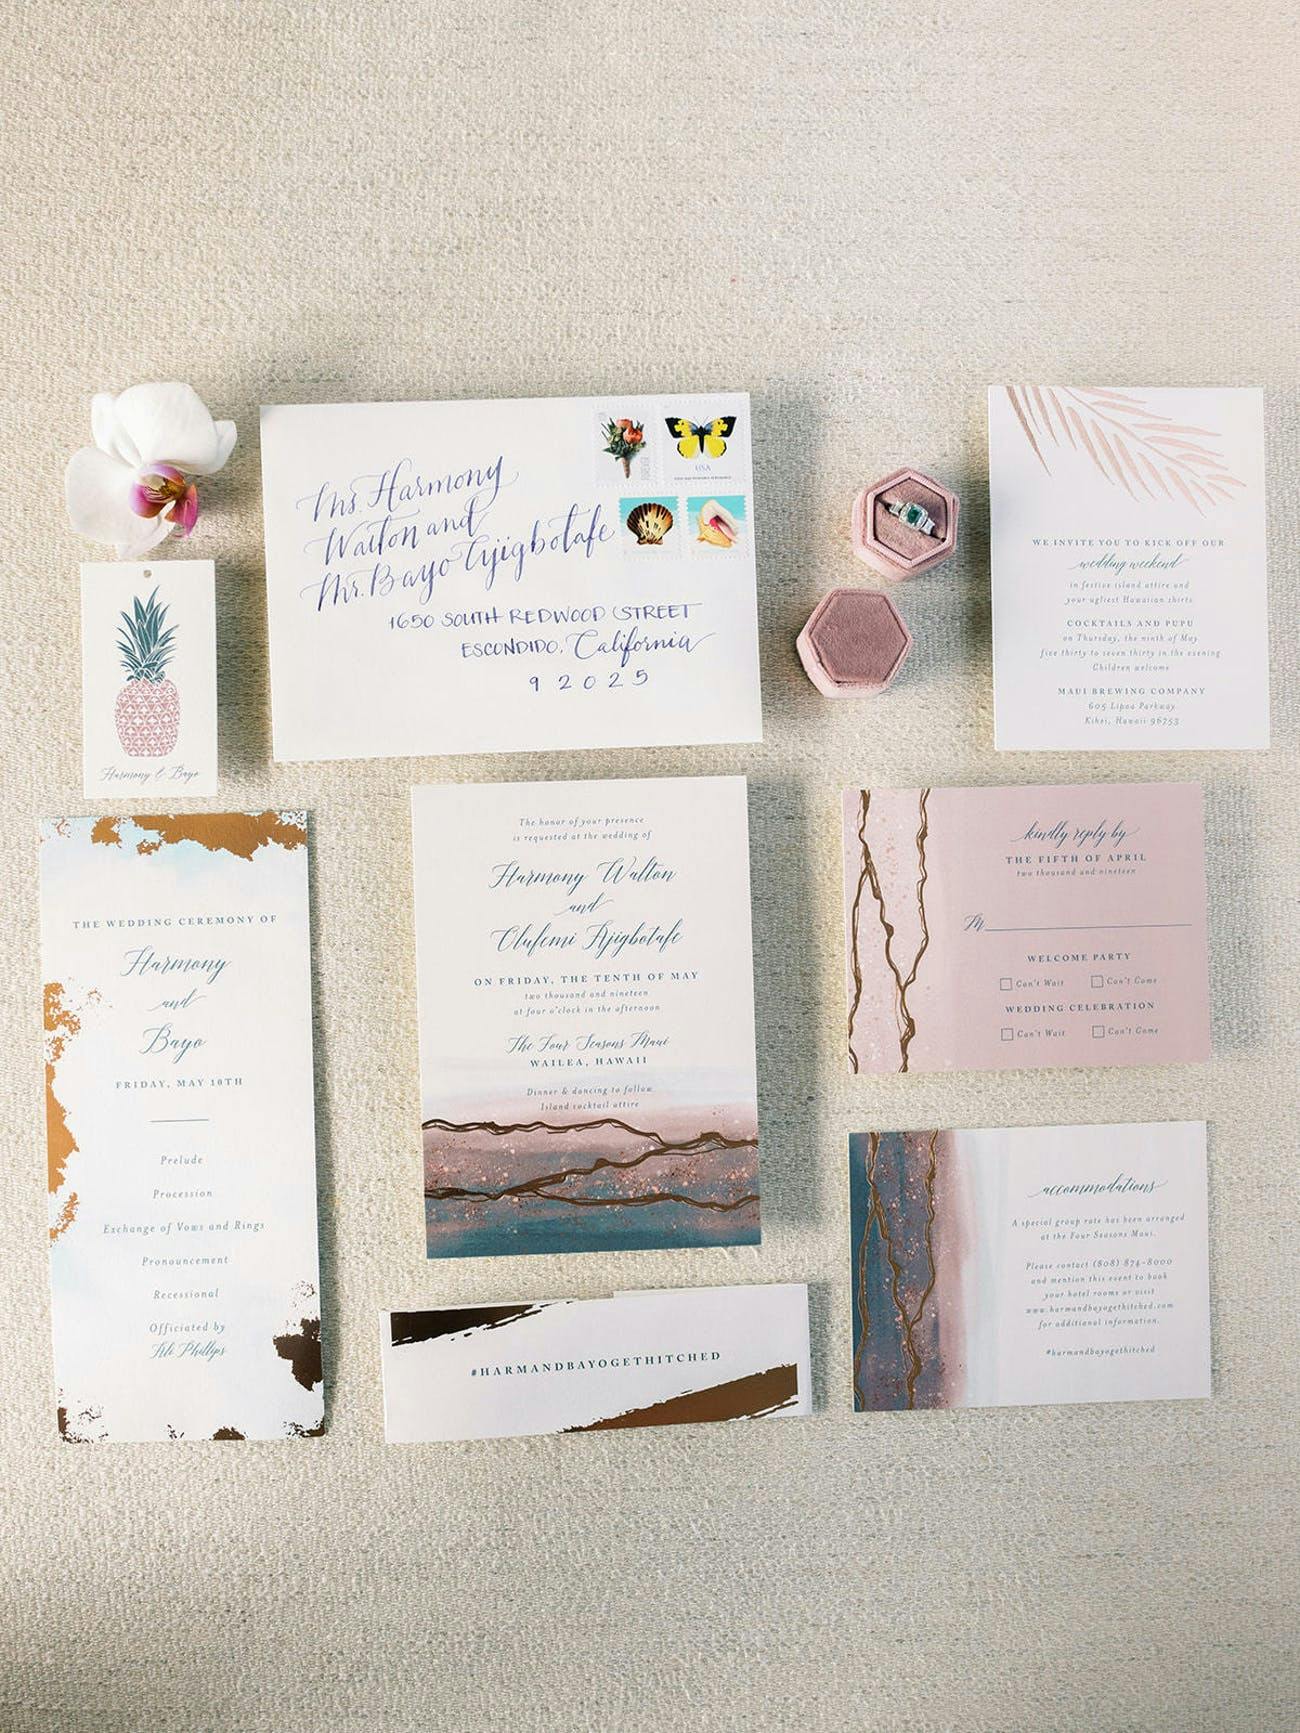 Wedding Invitations With Blue, Mauve, and Gold Water Color Work for Hawaii Wedding | PartySlate